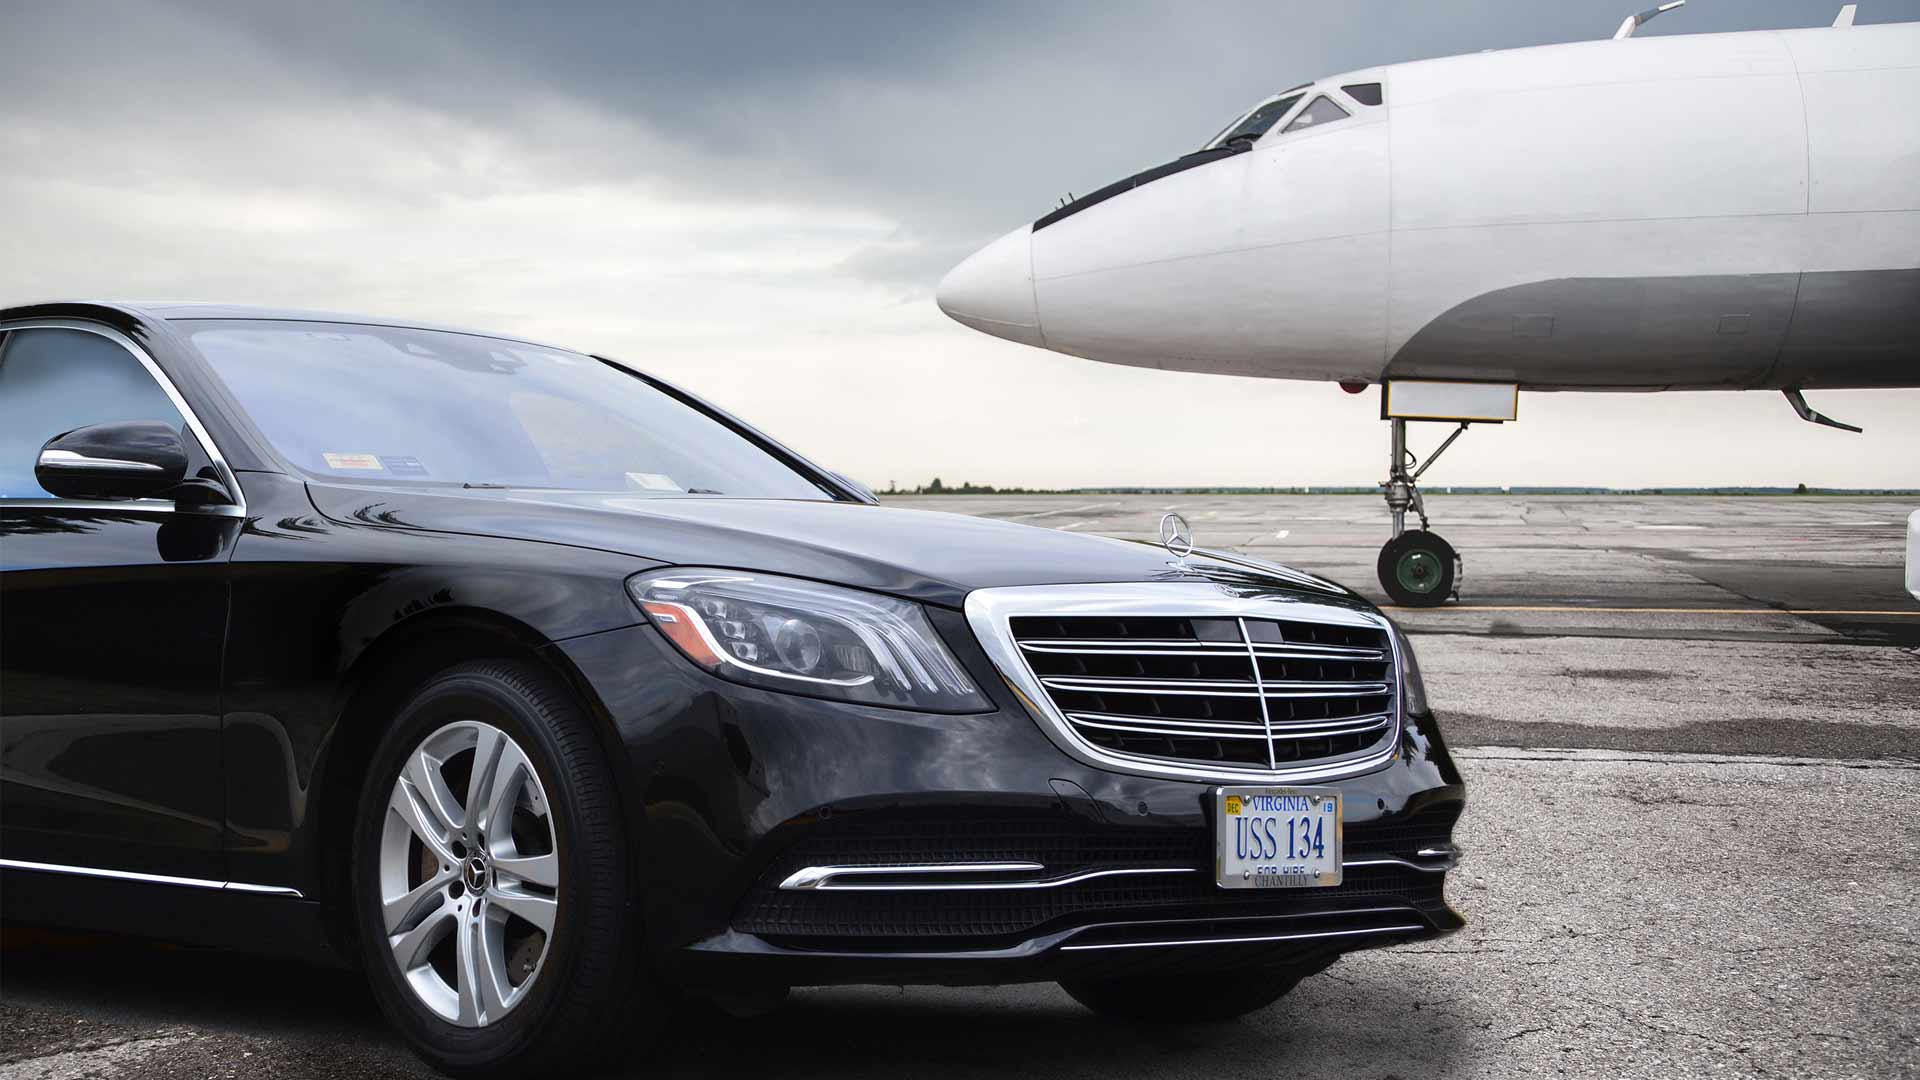 Chauffeured Sedan parked next to private plane